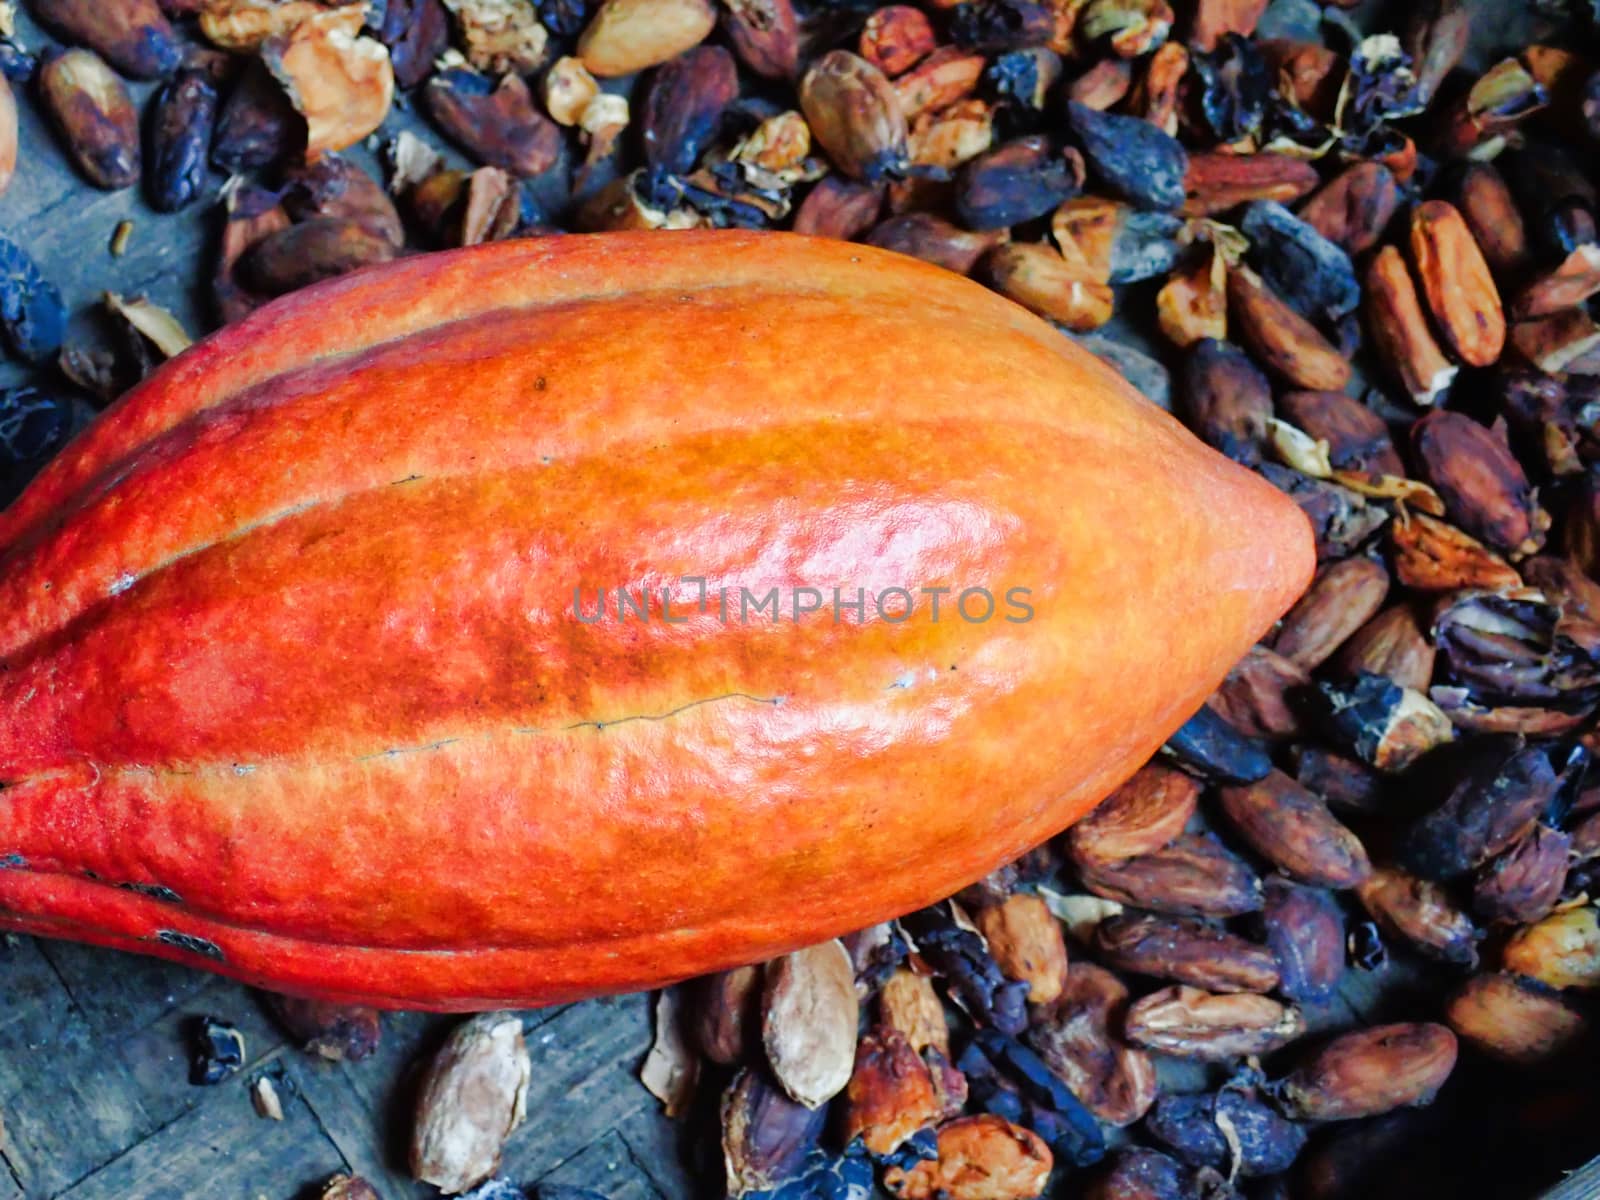 Cocoa fruit close up by silverwings